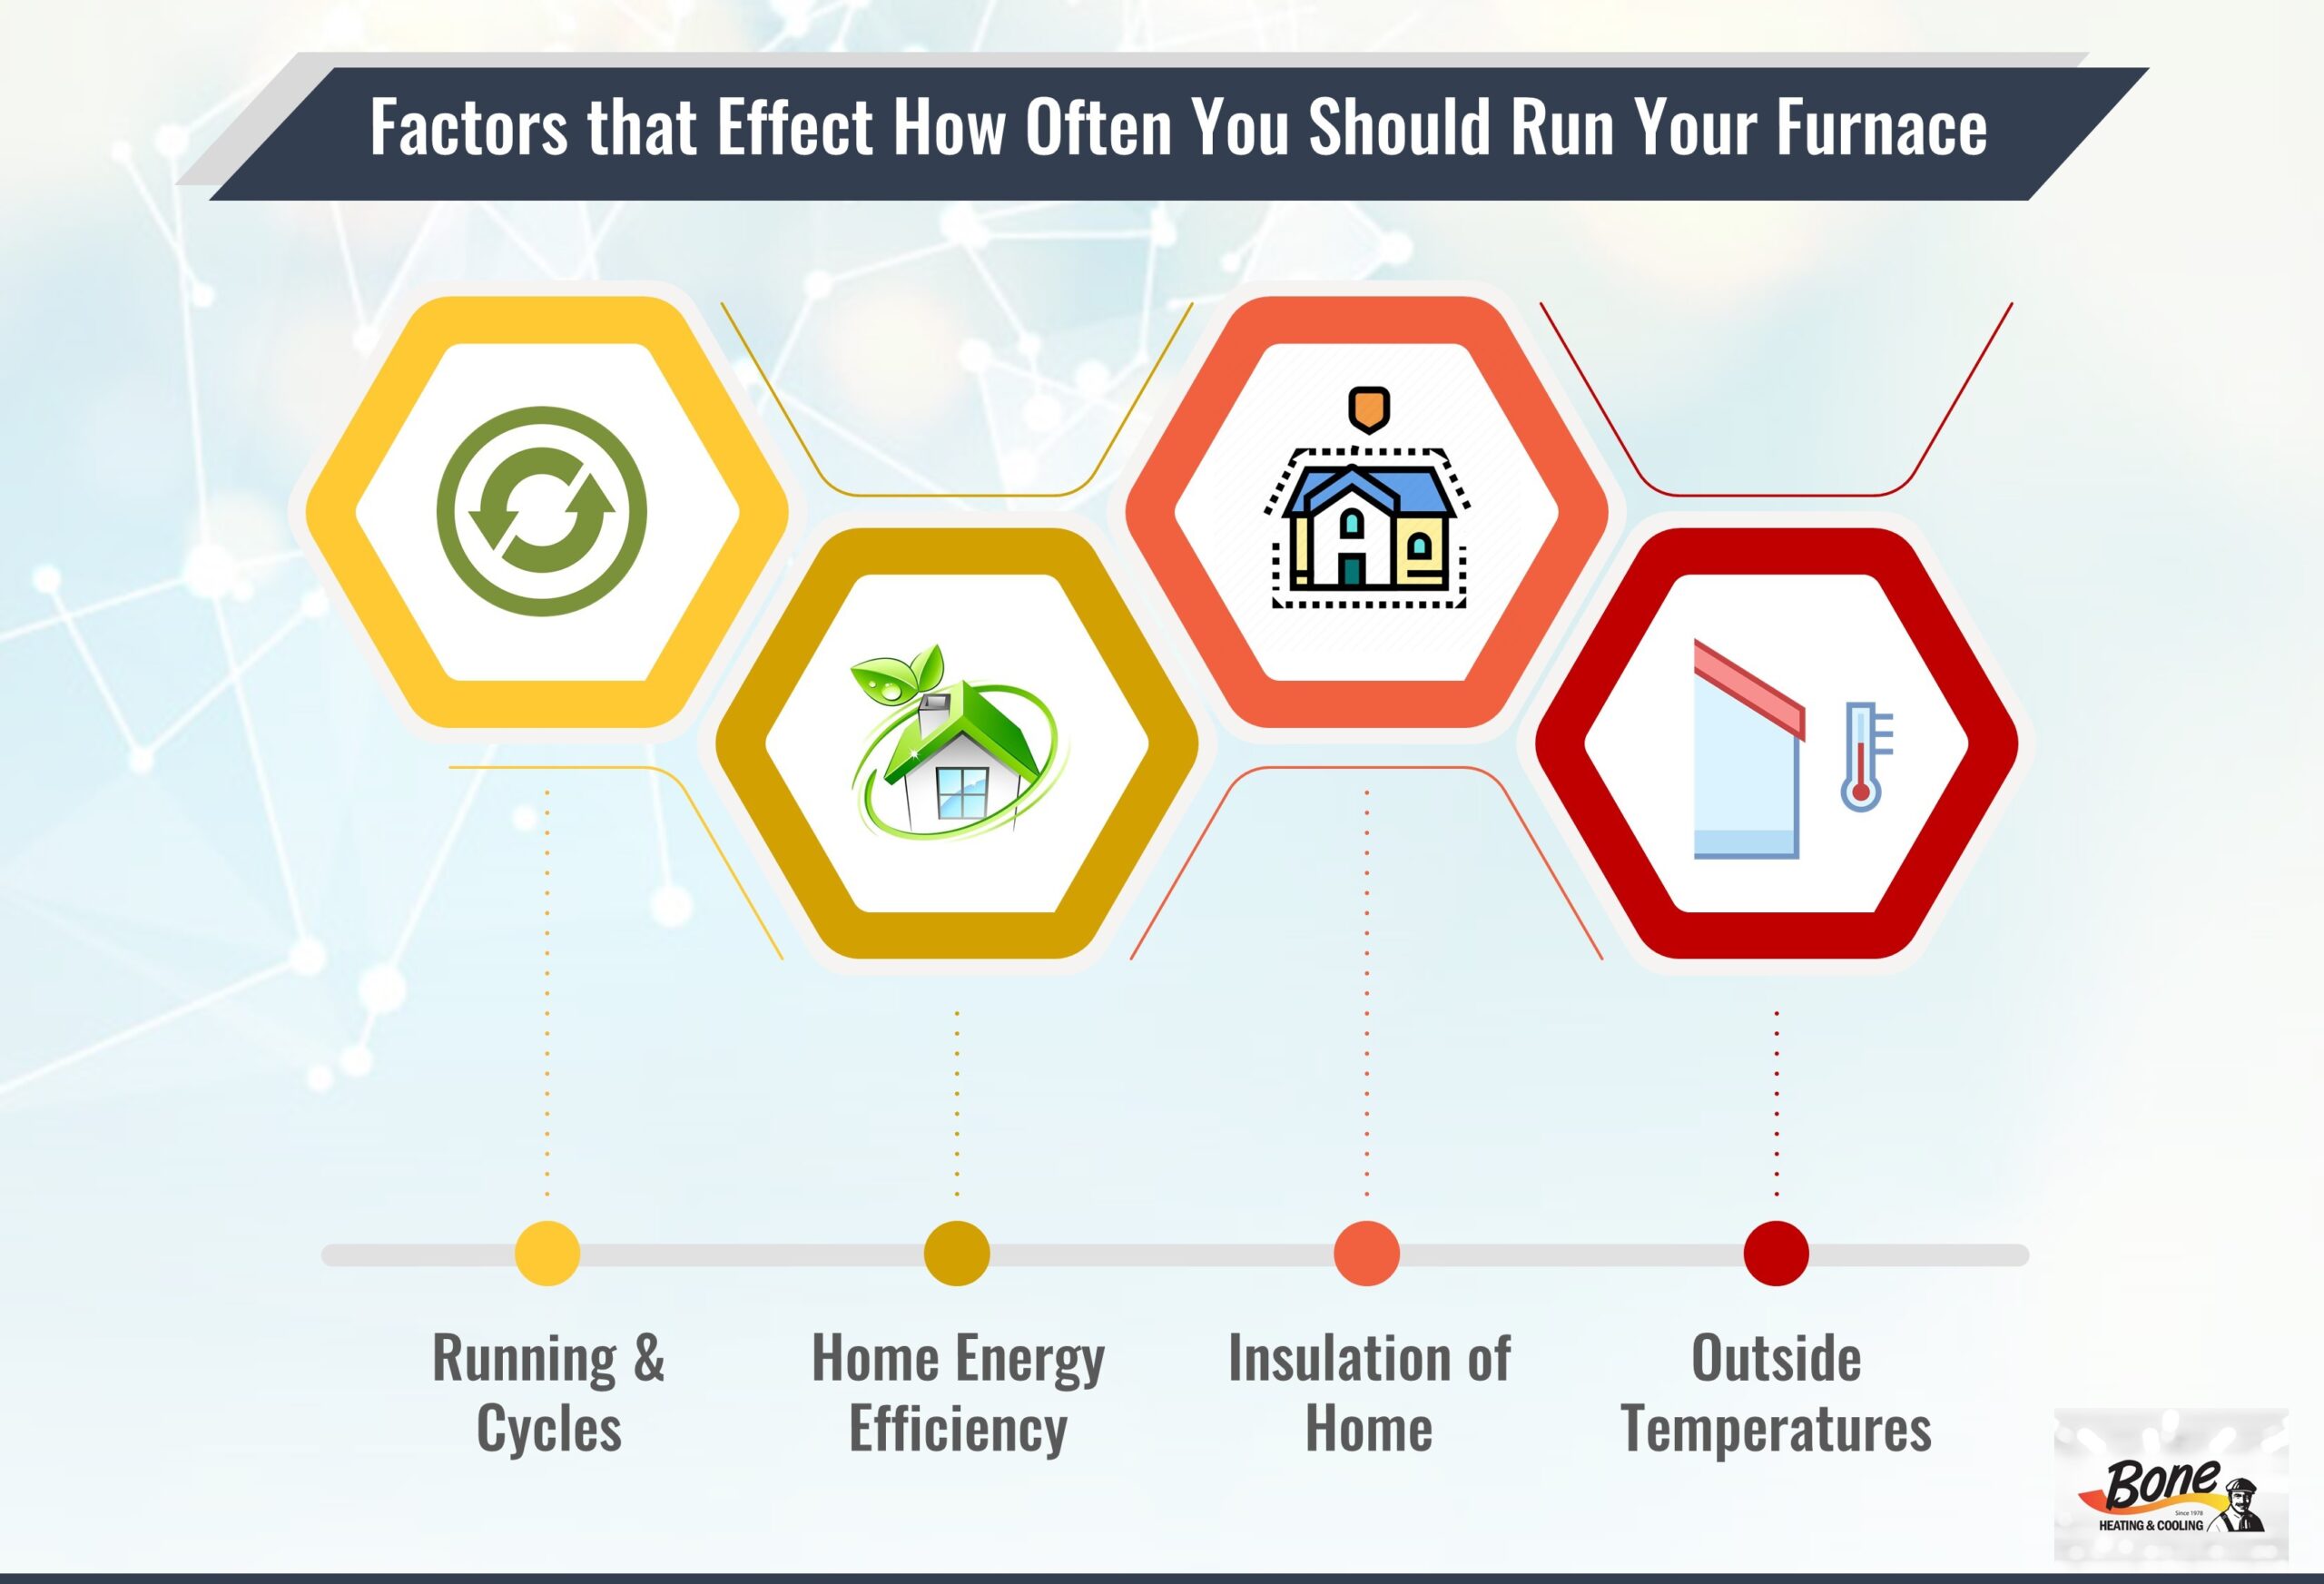 Factors that Effect How Often You Should Run Your Furnace